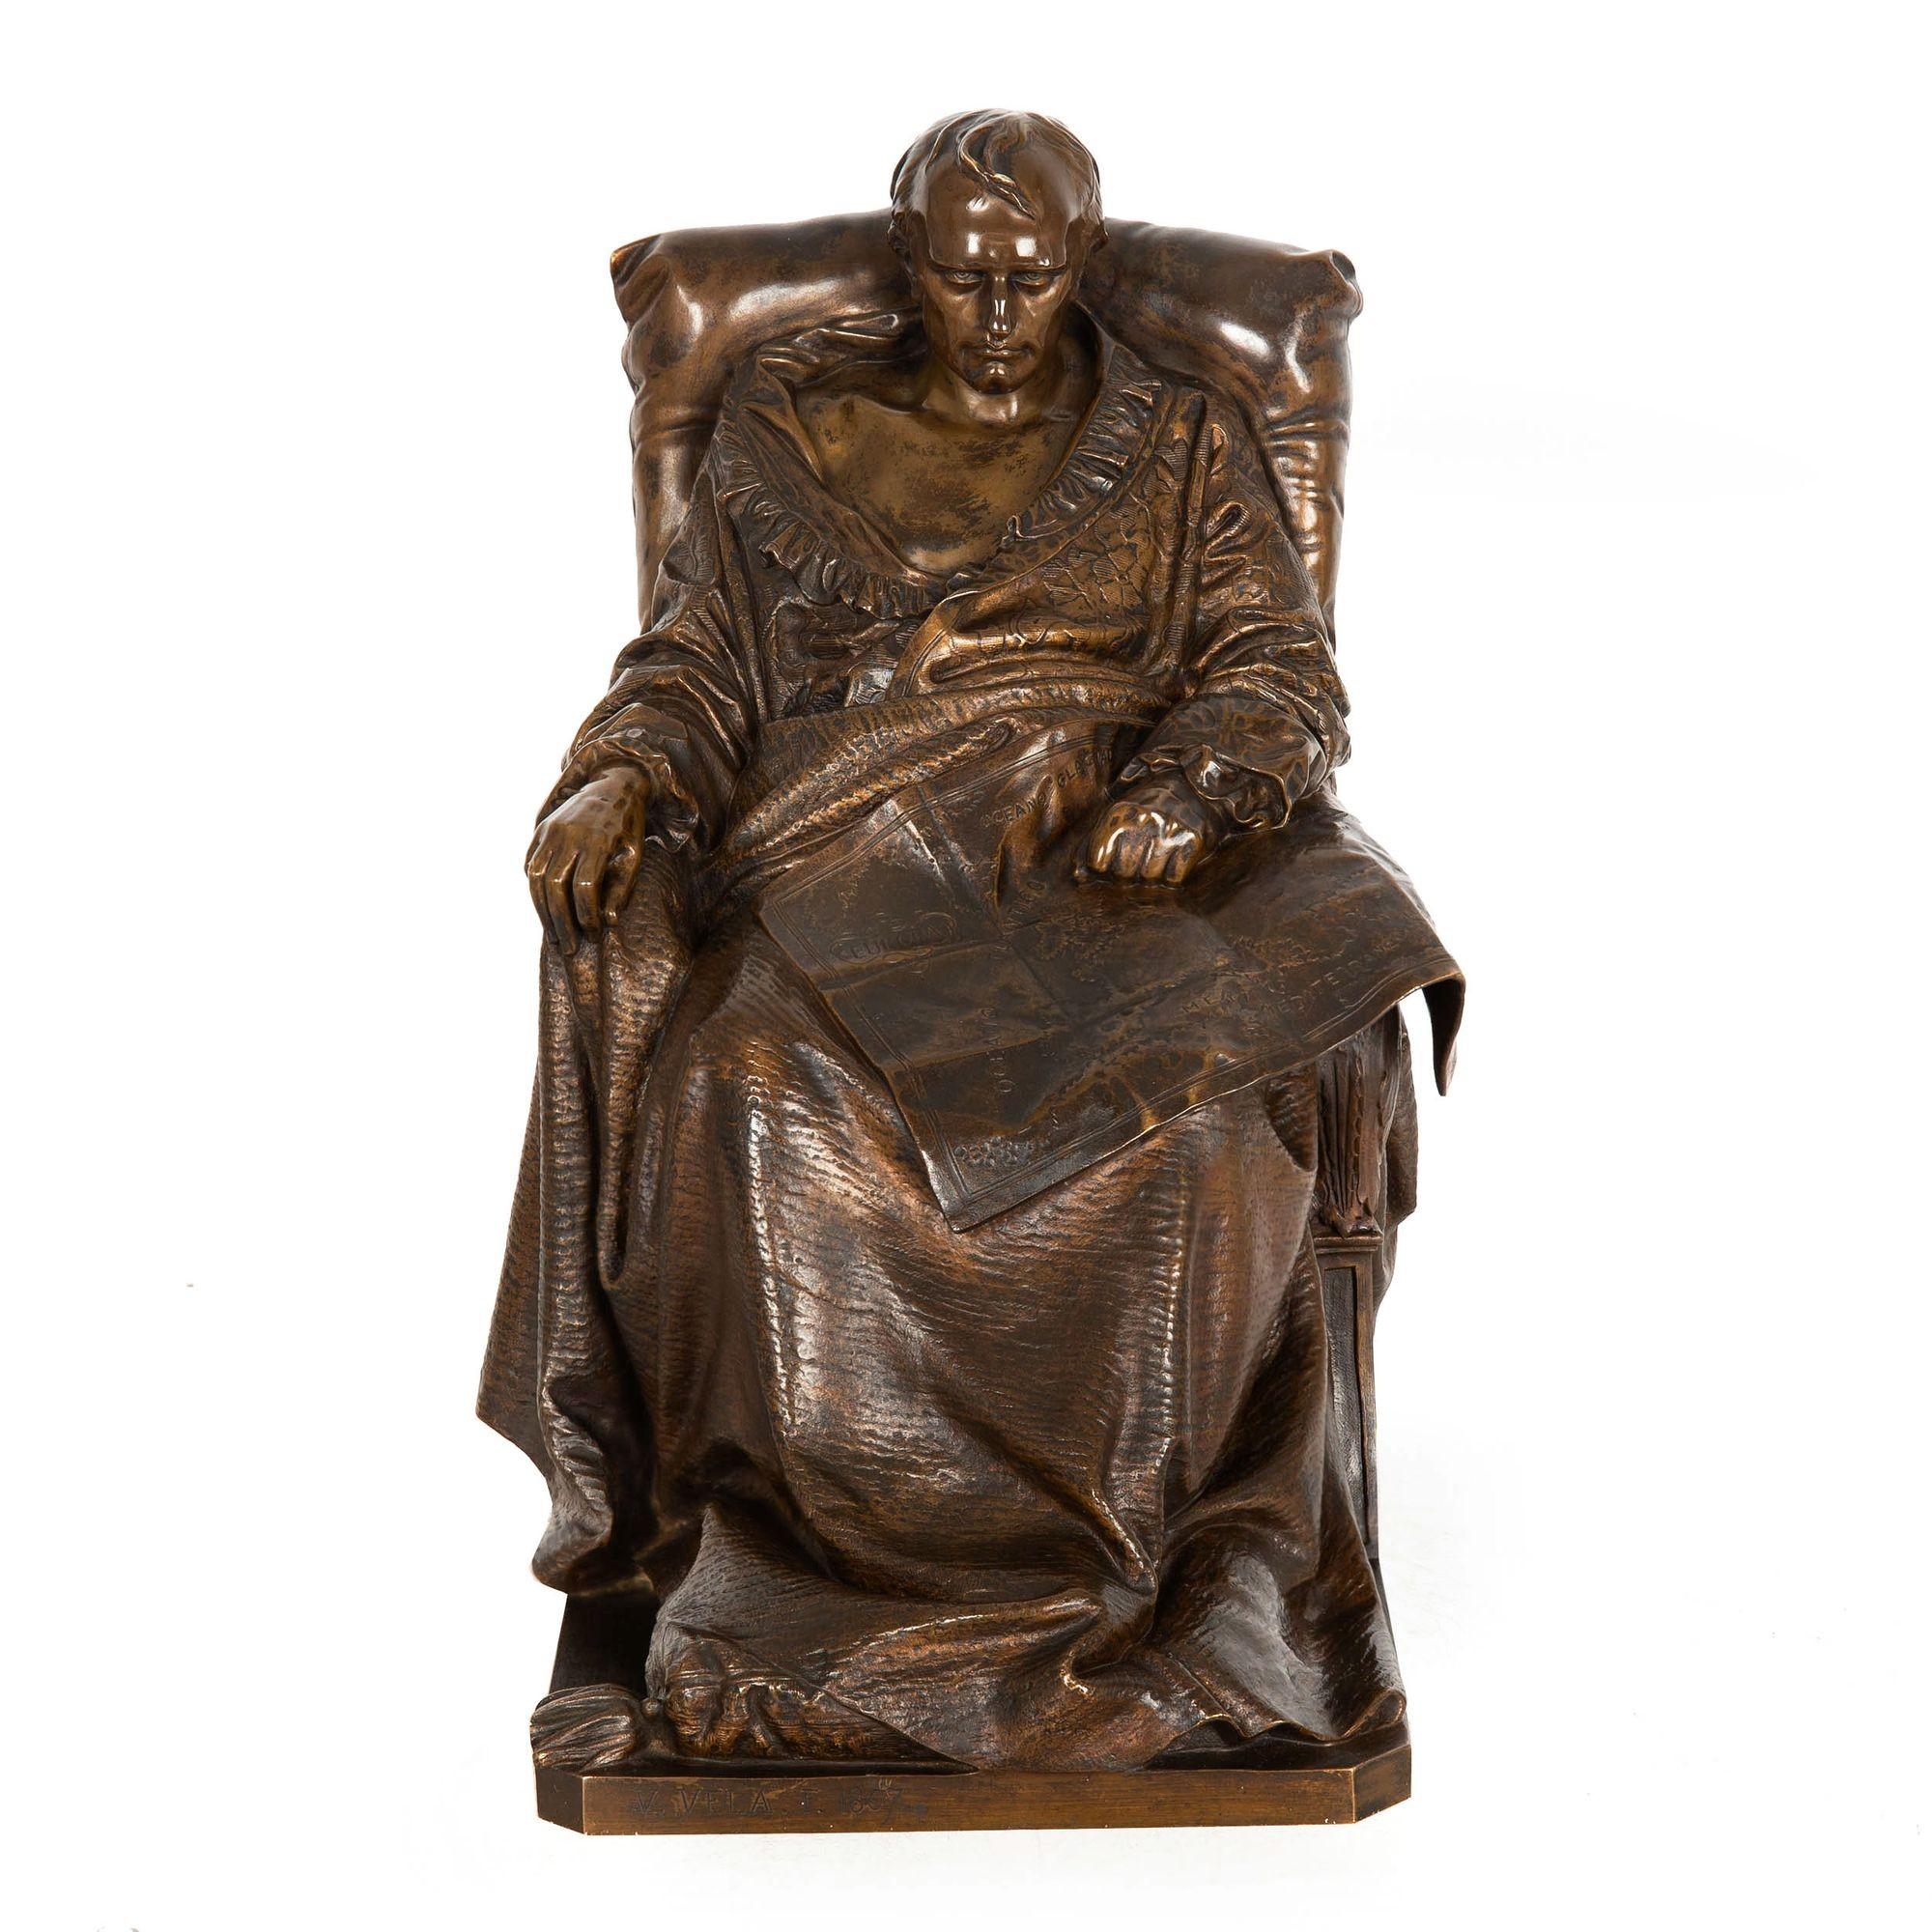 19th Century Rare French Bronze Sculpture “Last Days of Napoleon” after Vincenzo Vela For Sale